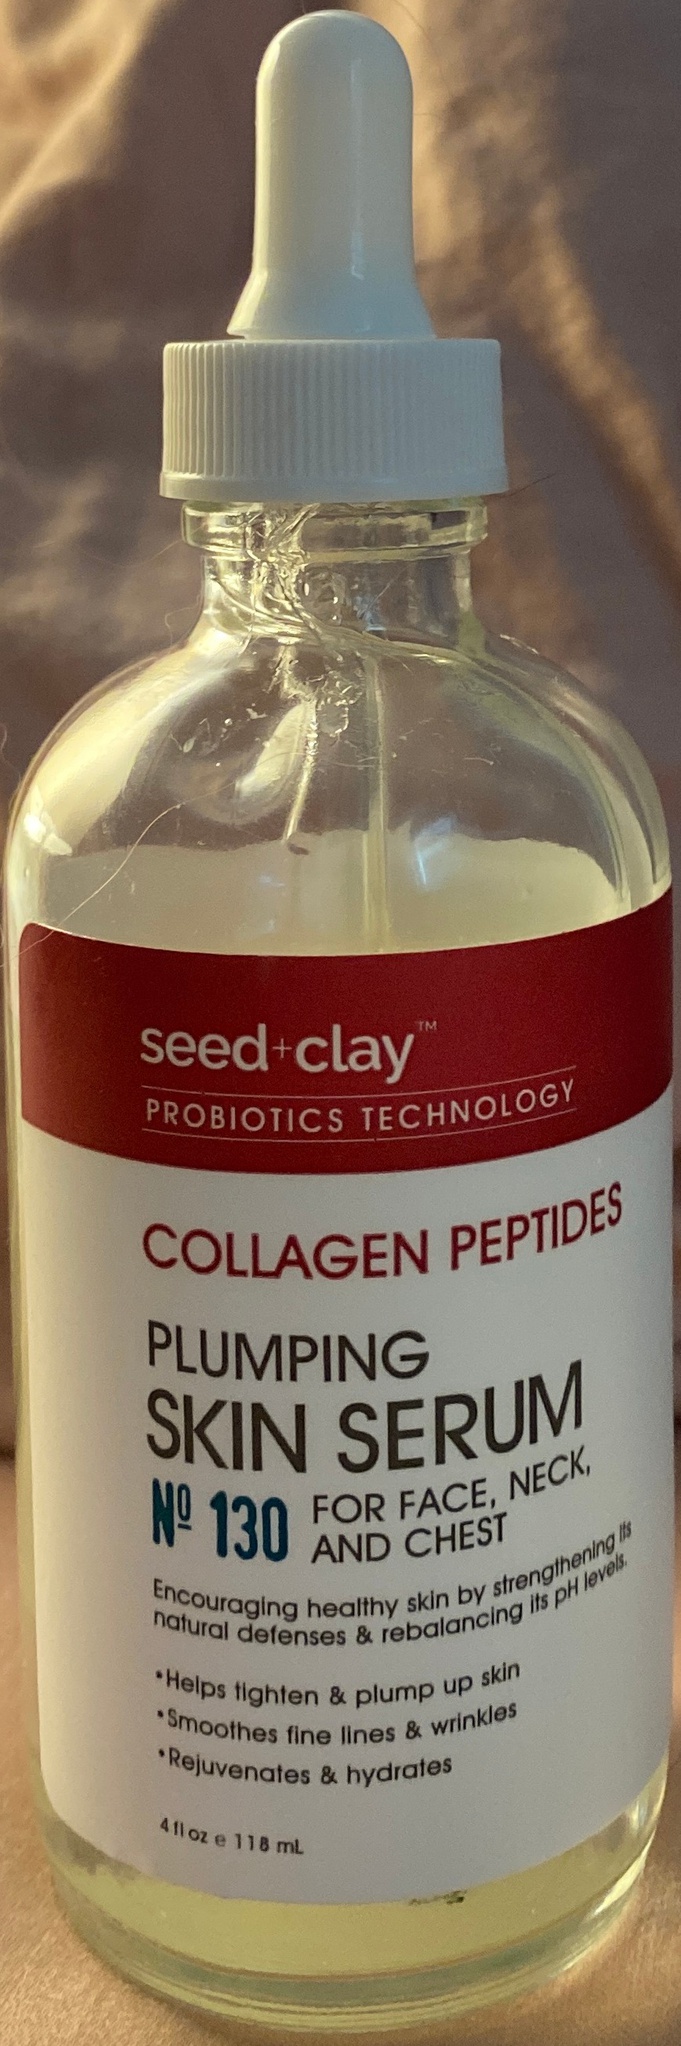 Seed + Clay Collagen Peptides Plumping Skin Serum